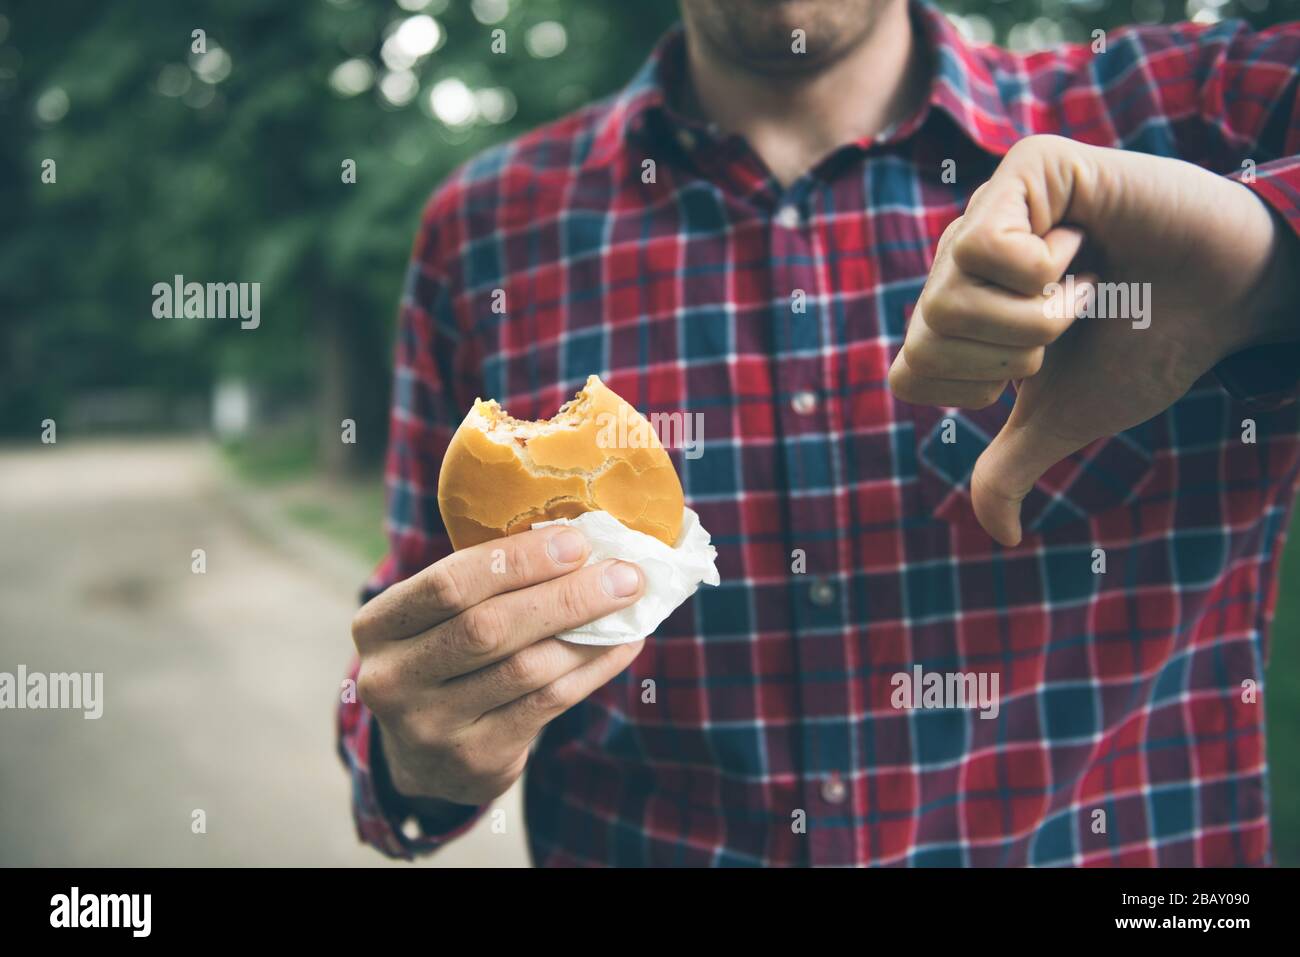 Man opening a hamburger. Man is eating in the park Stock Photo